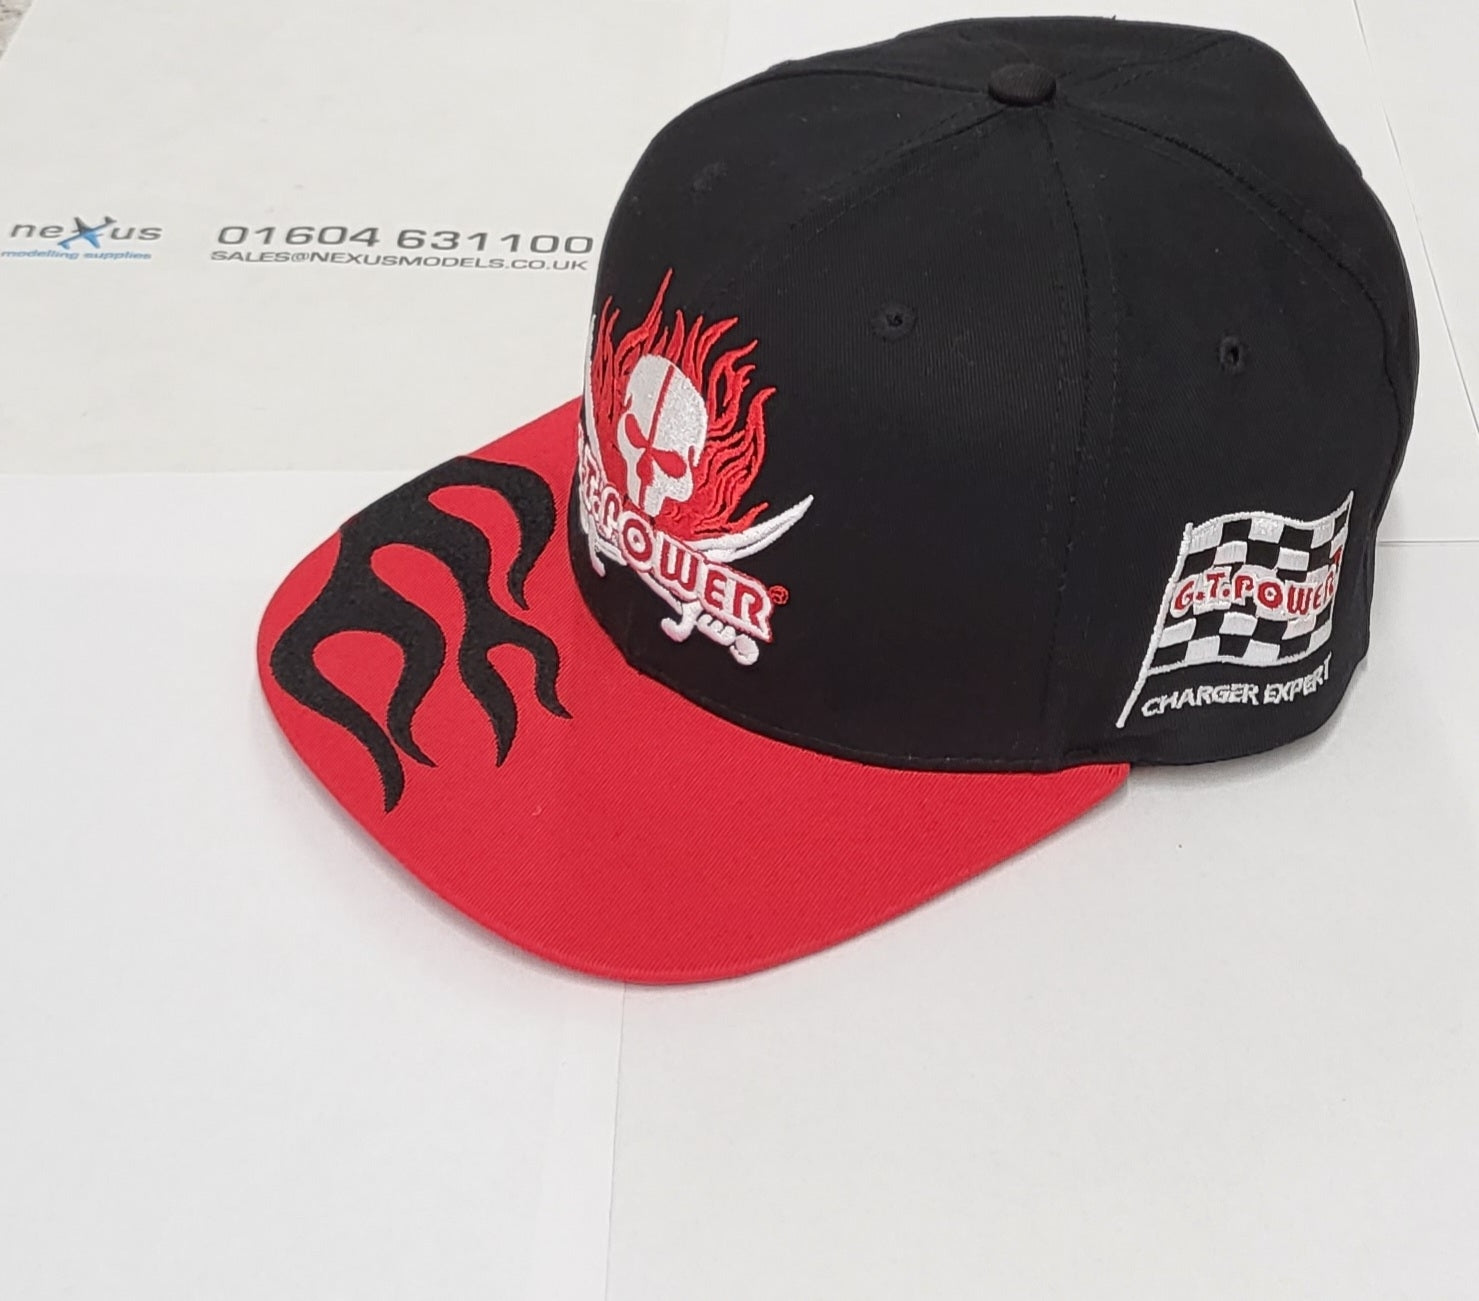 GT Power Snapback Black/Red One Size